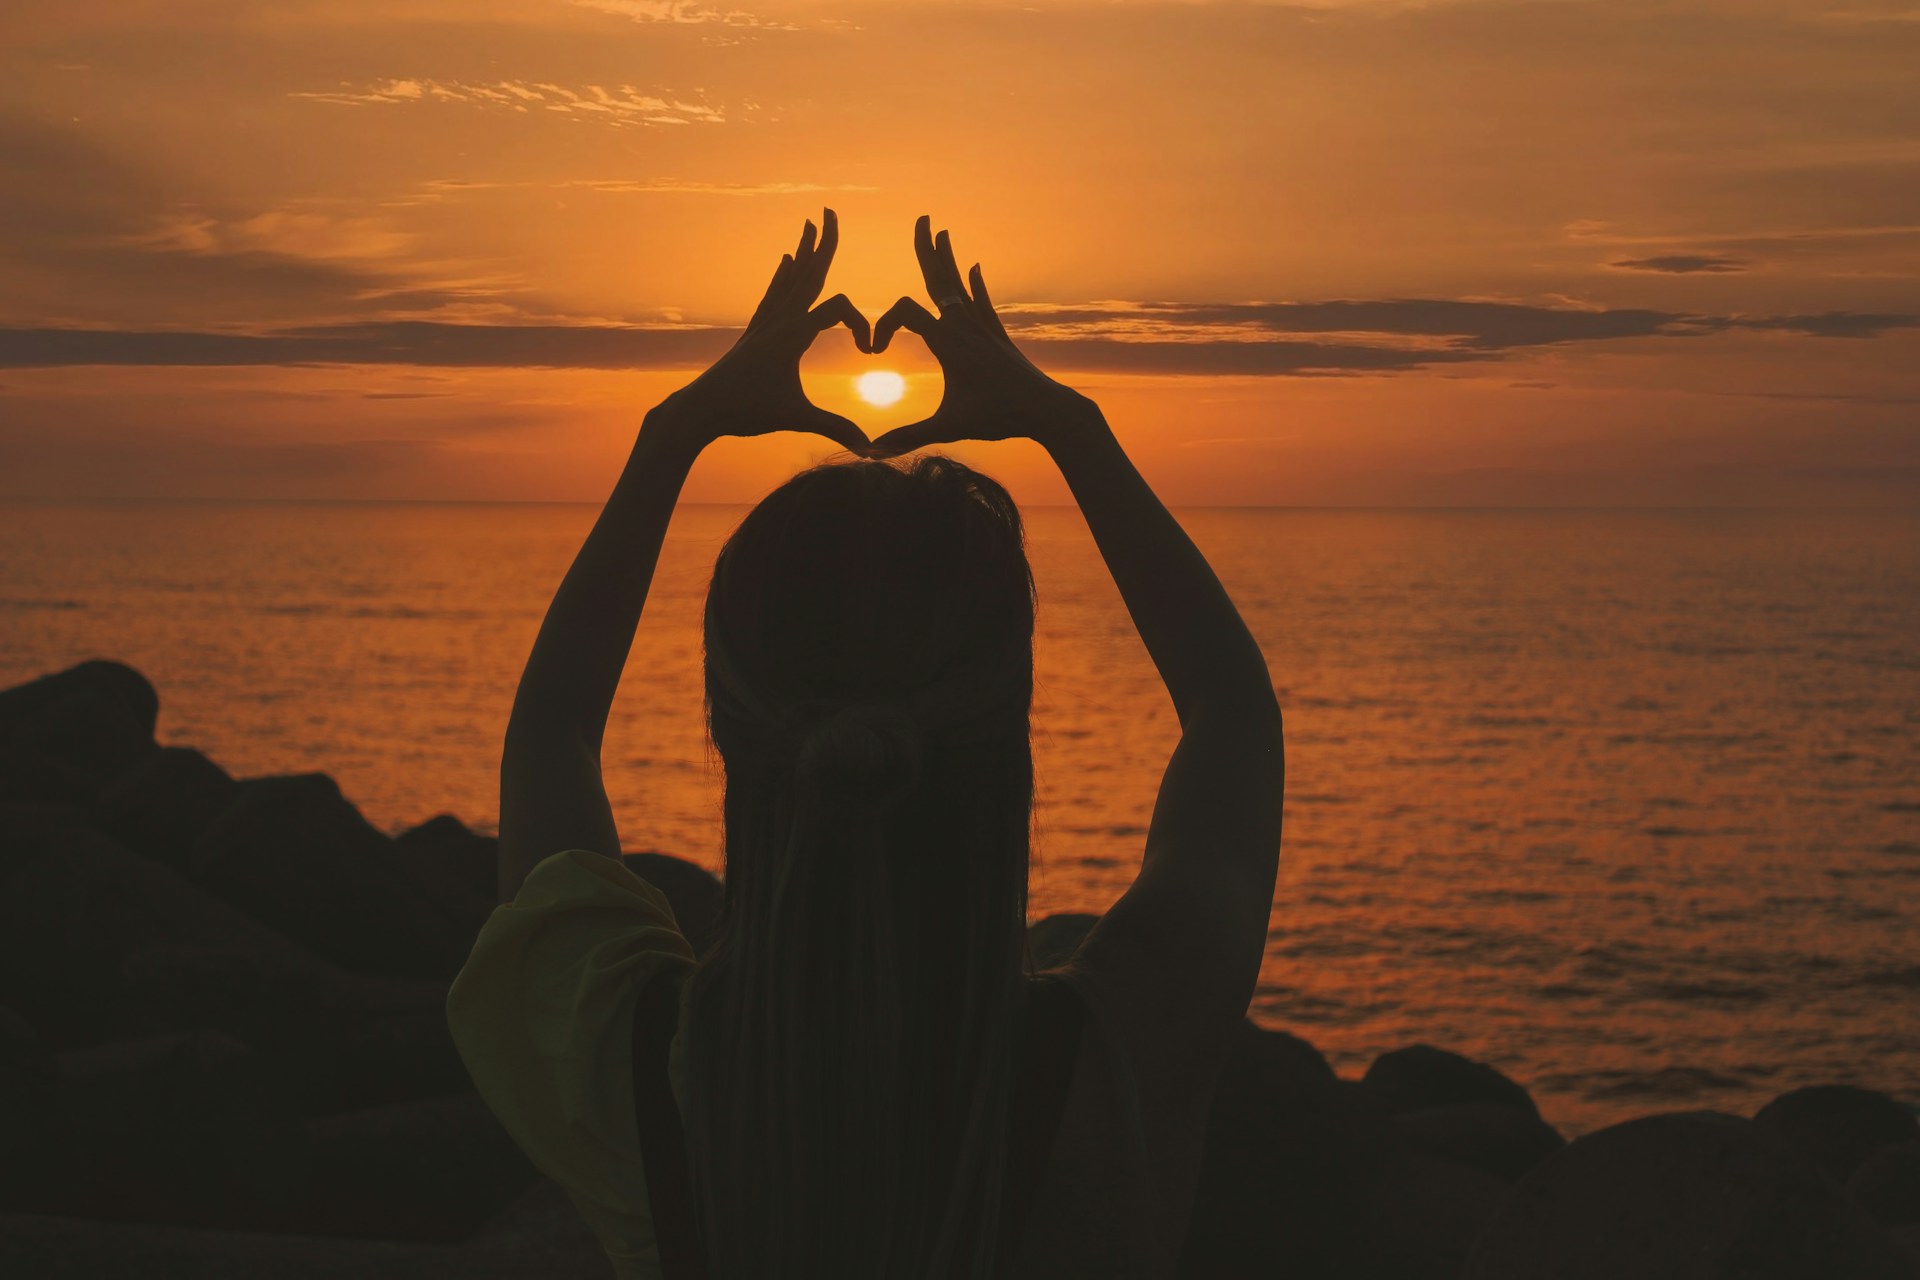 Person making the shape of a love heart in front of the setting sun